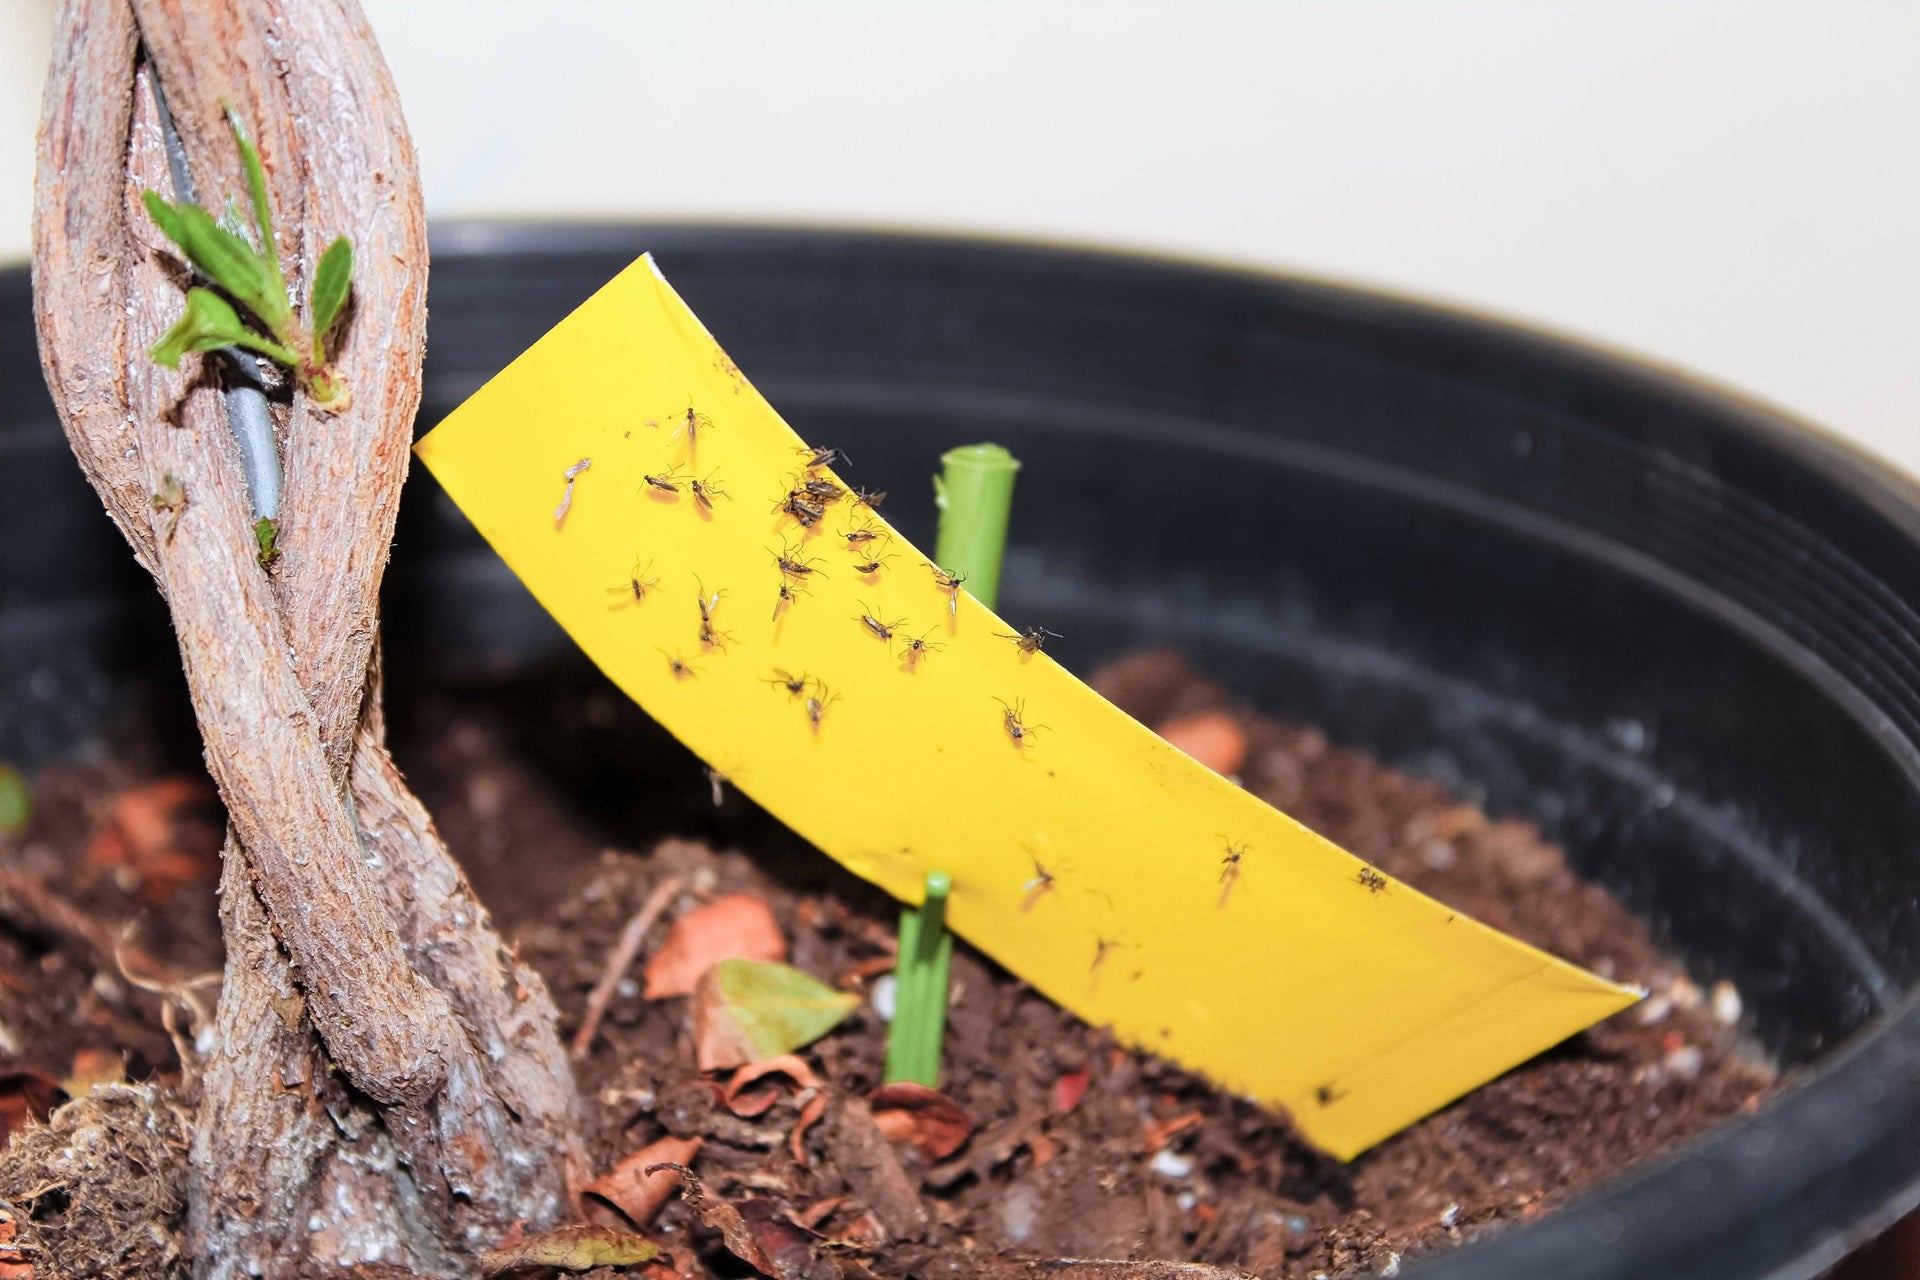 How To Deal With Fungus Gnats On Houseplants (What Works)